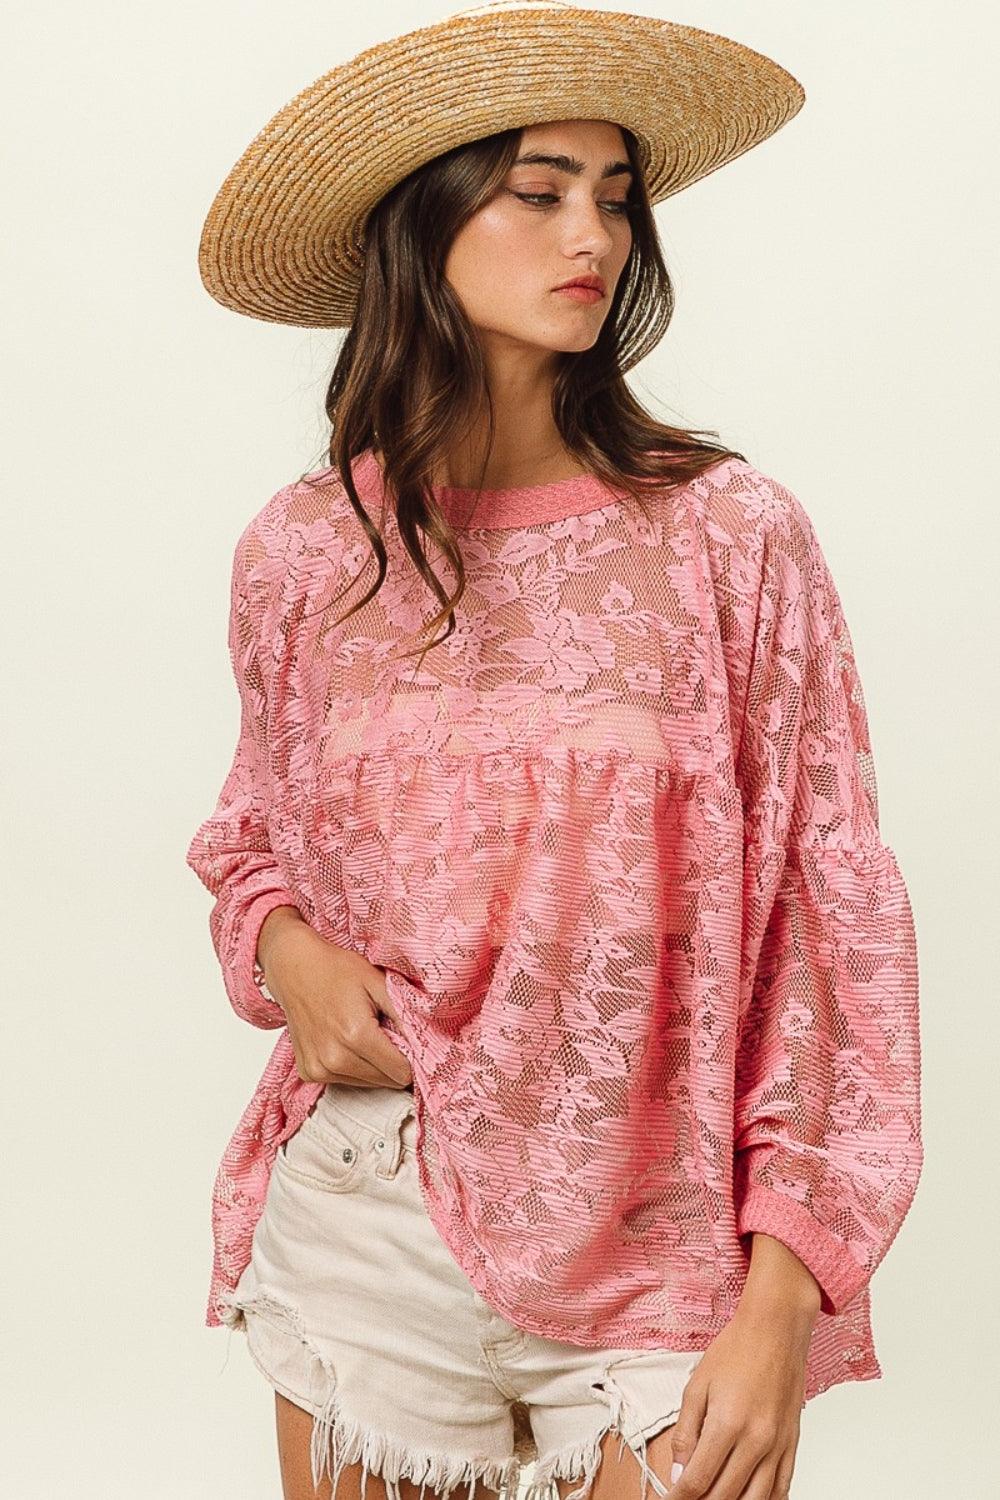 BiBi Floral Lace Long Sleeve Top - Wildflower Hippies